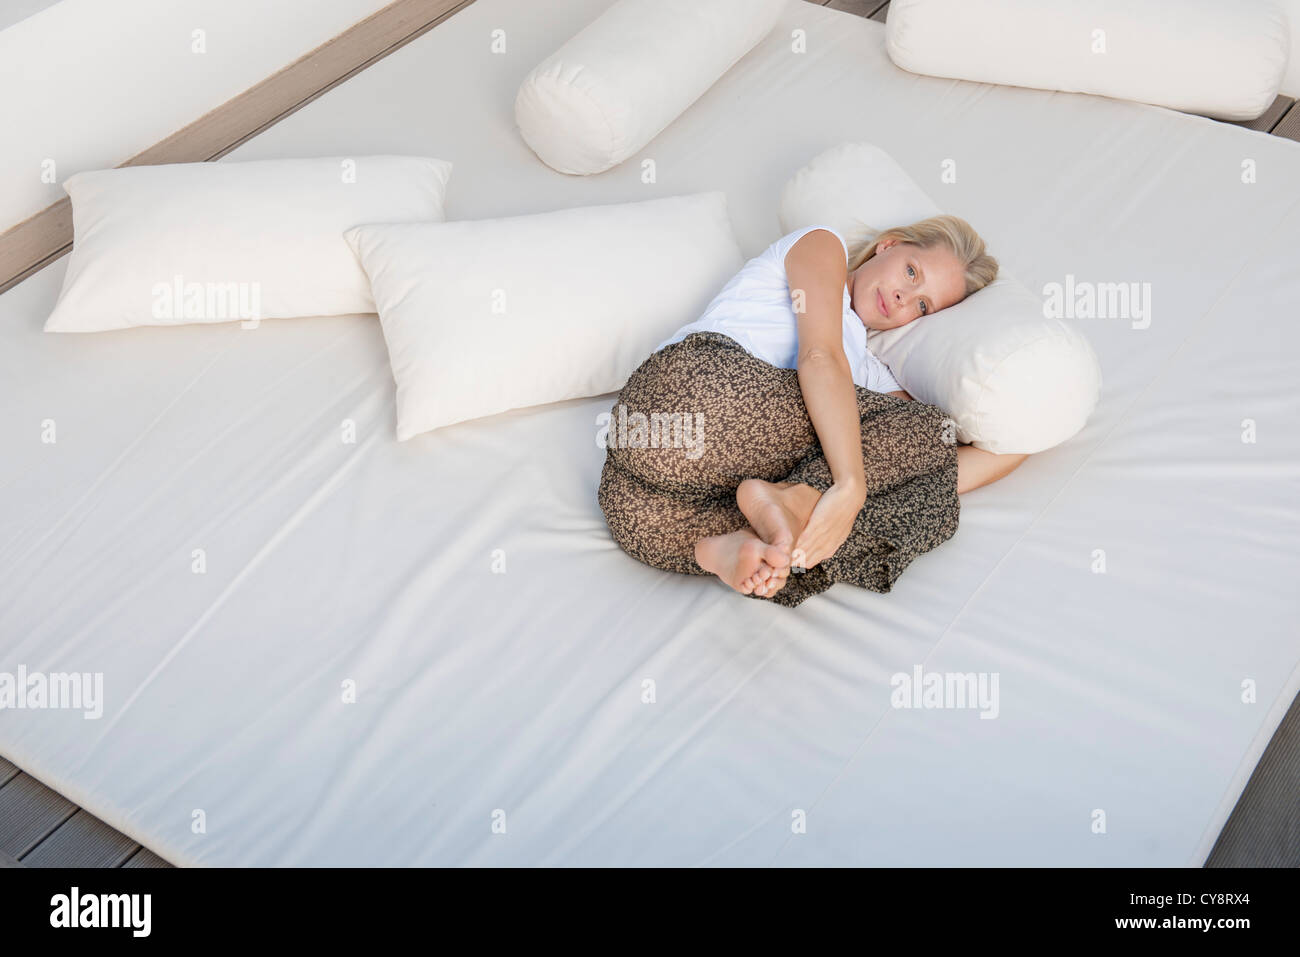 Young woman relaxing on bed in fetal position Stock Photo